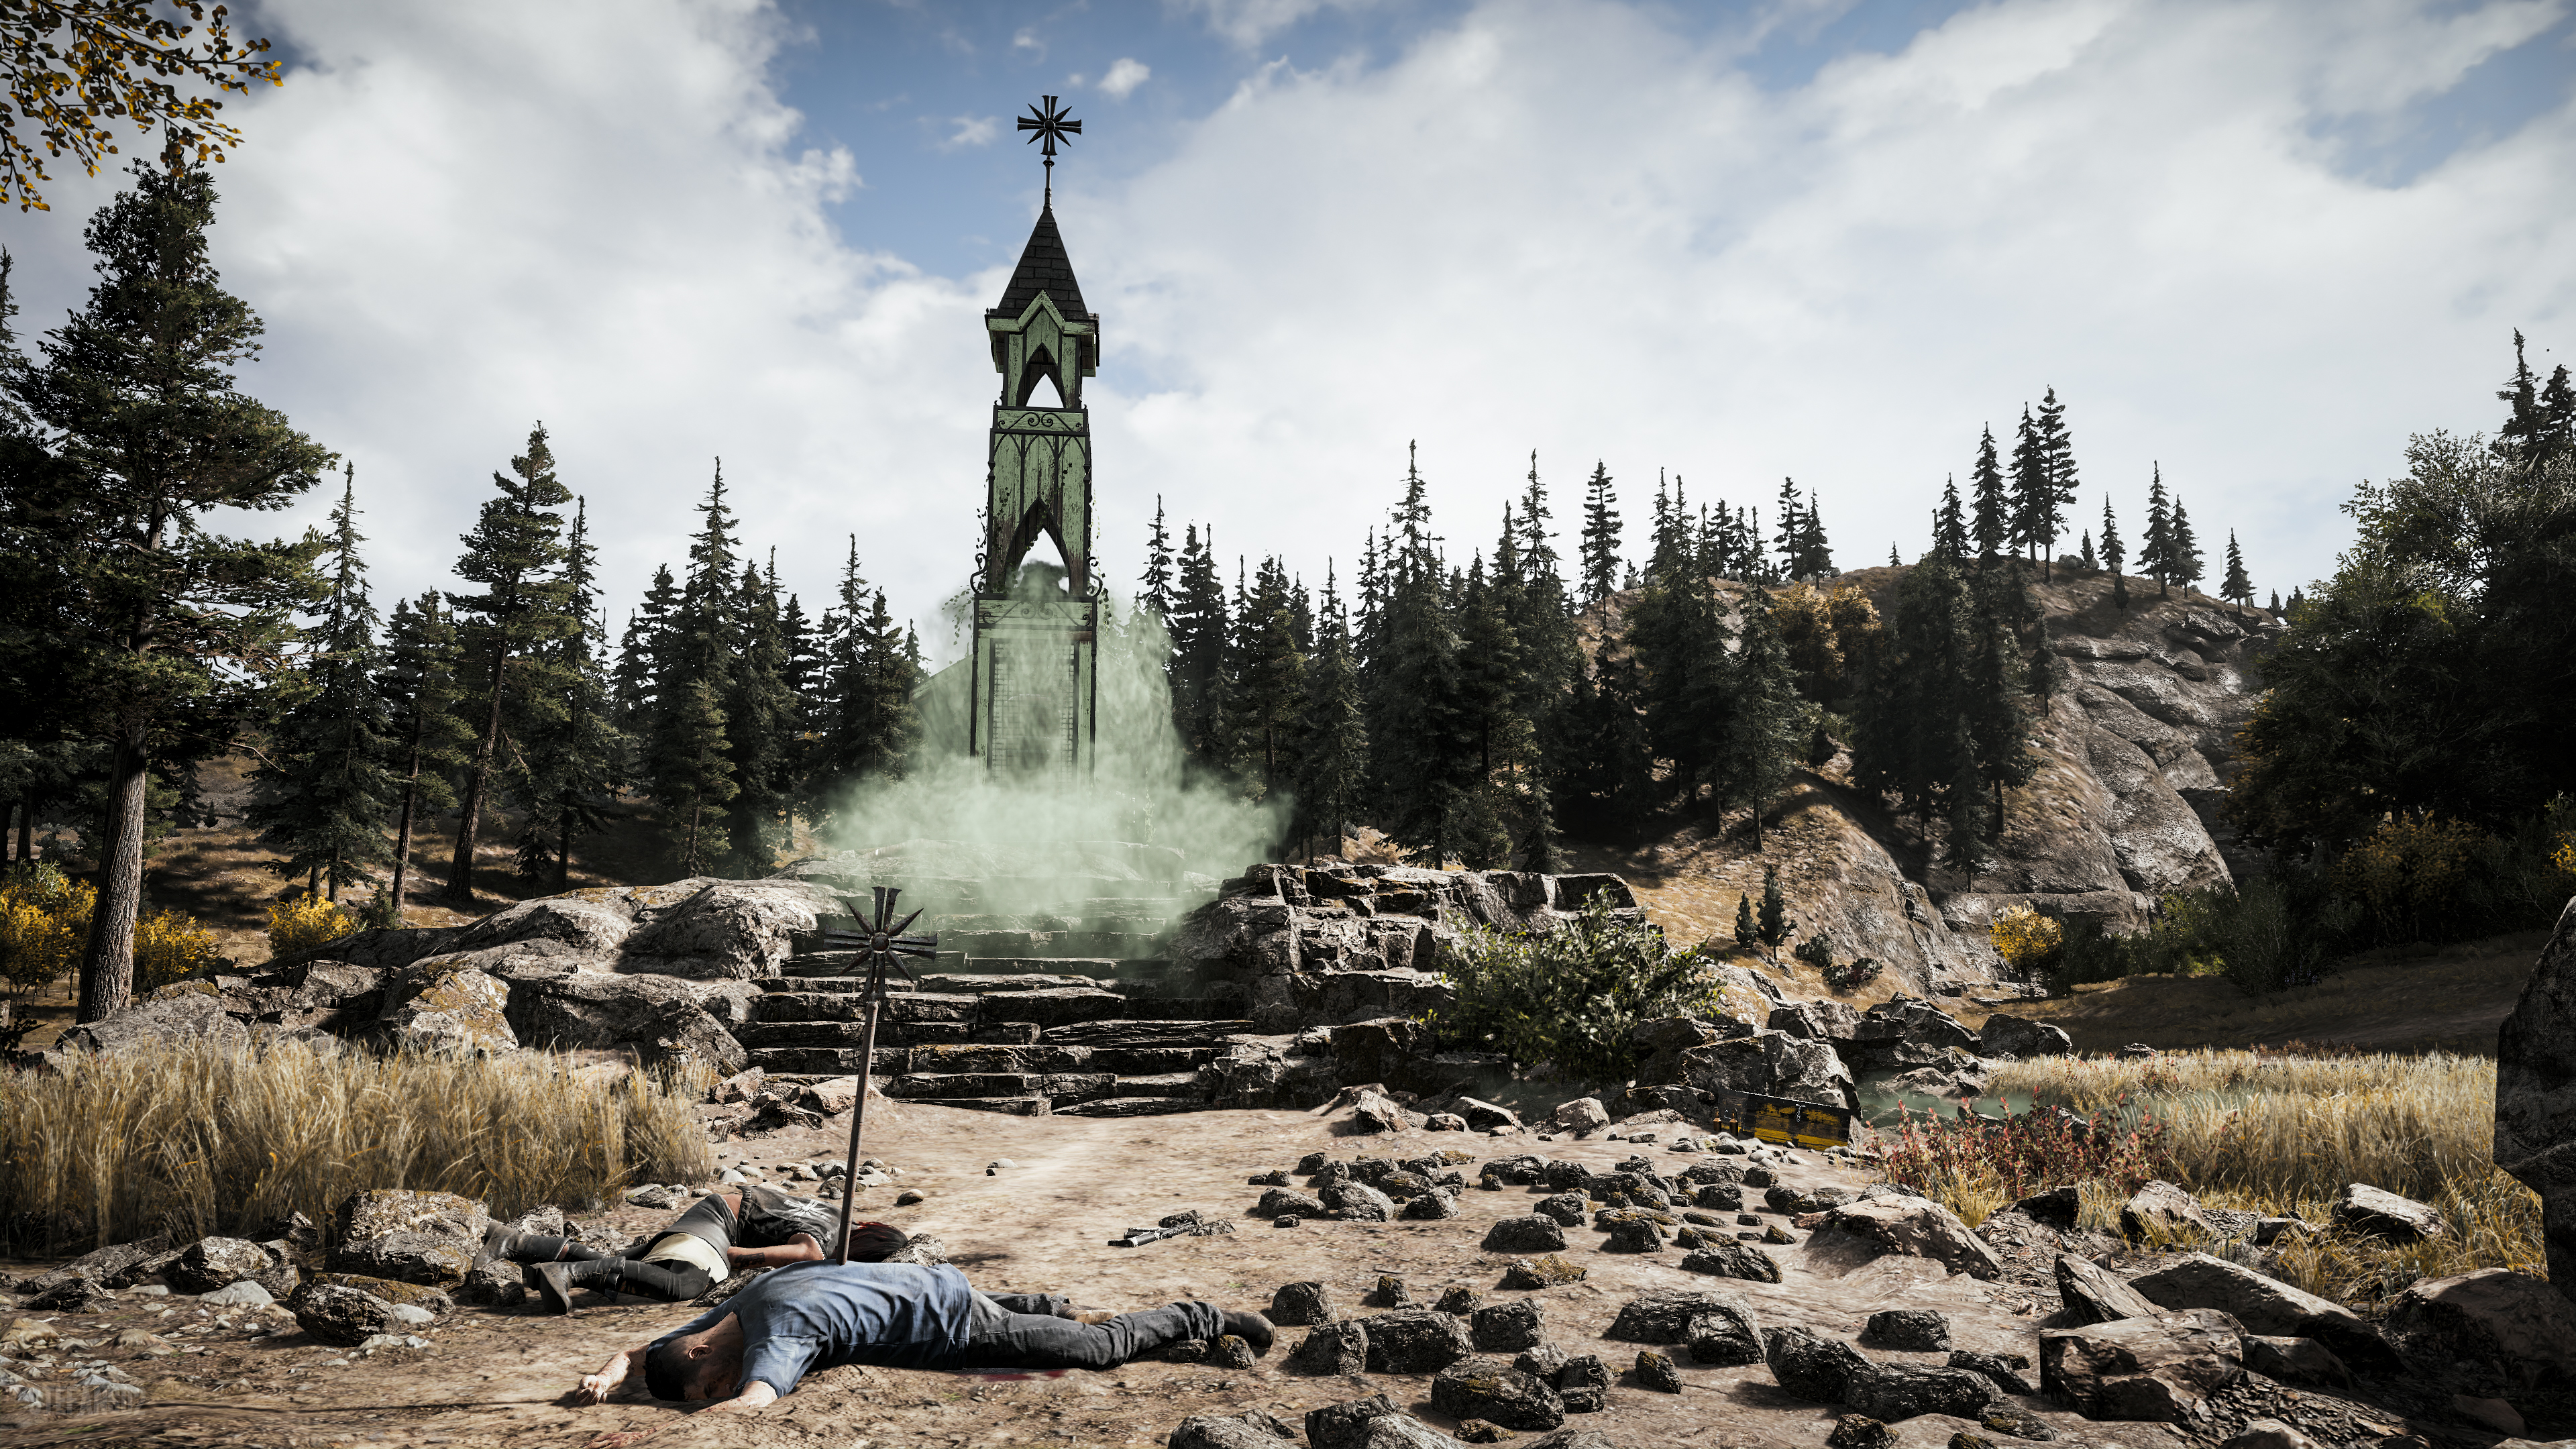 Download wallpaper 1280x2120 horse ride far cry 5 video game iphone 6  plus 1280x2120 hd background 4775